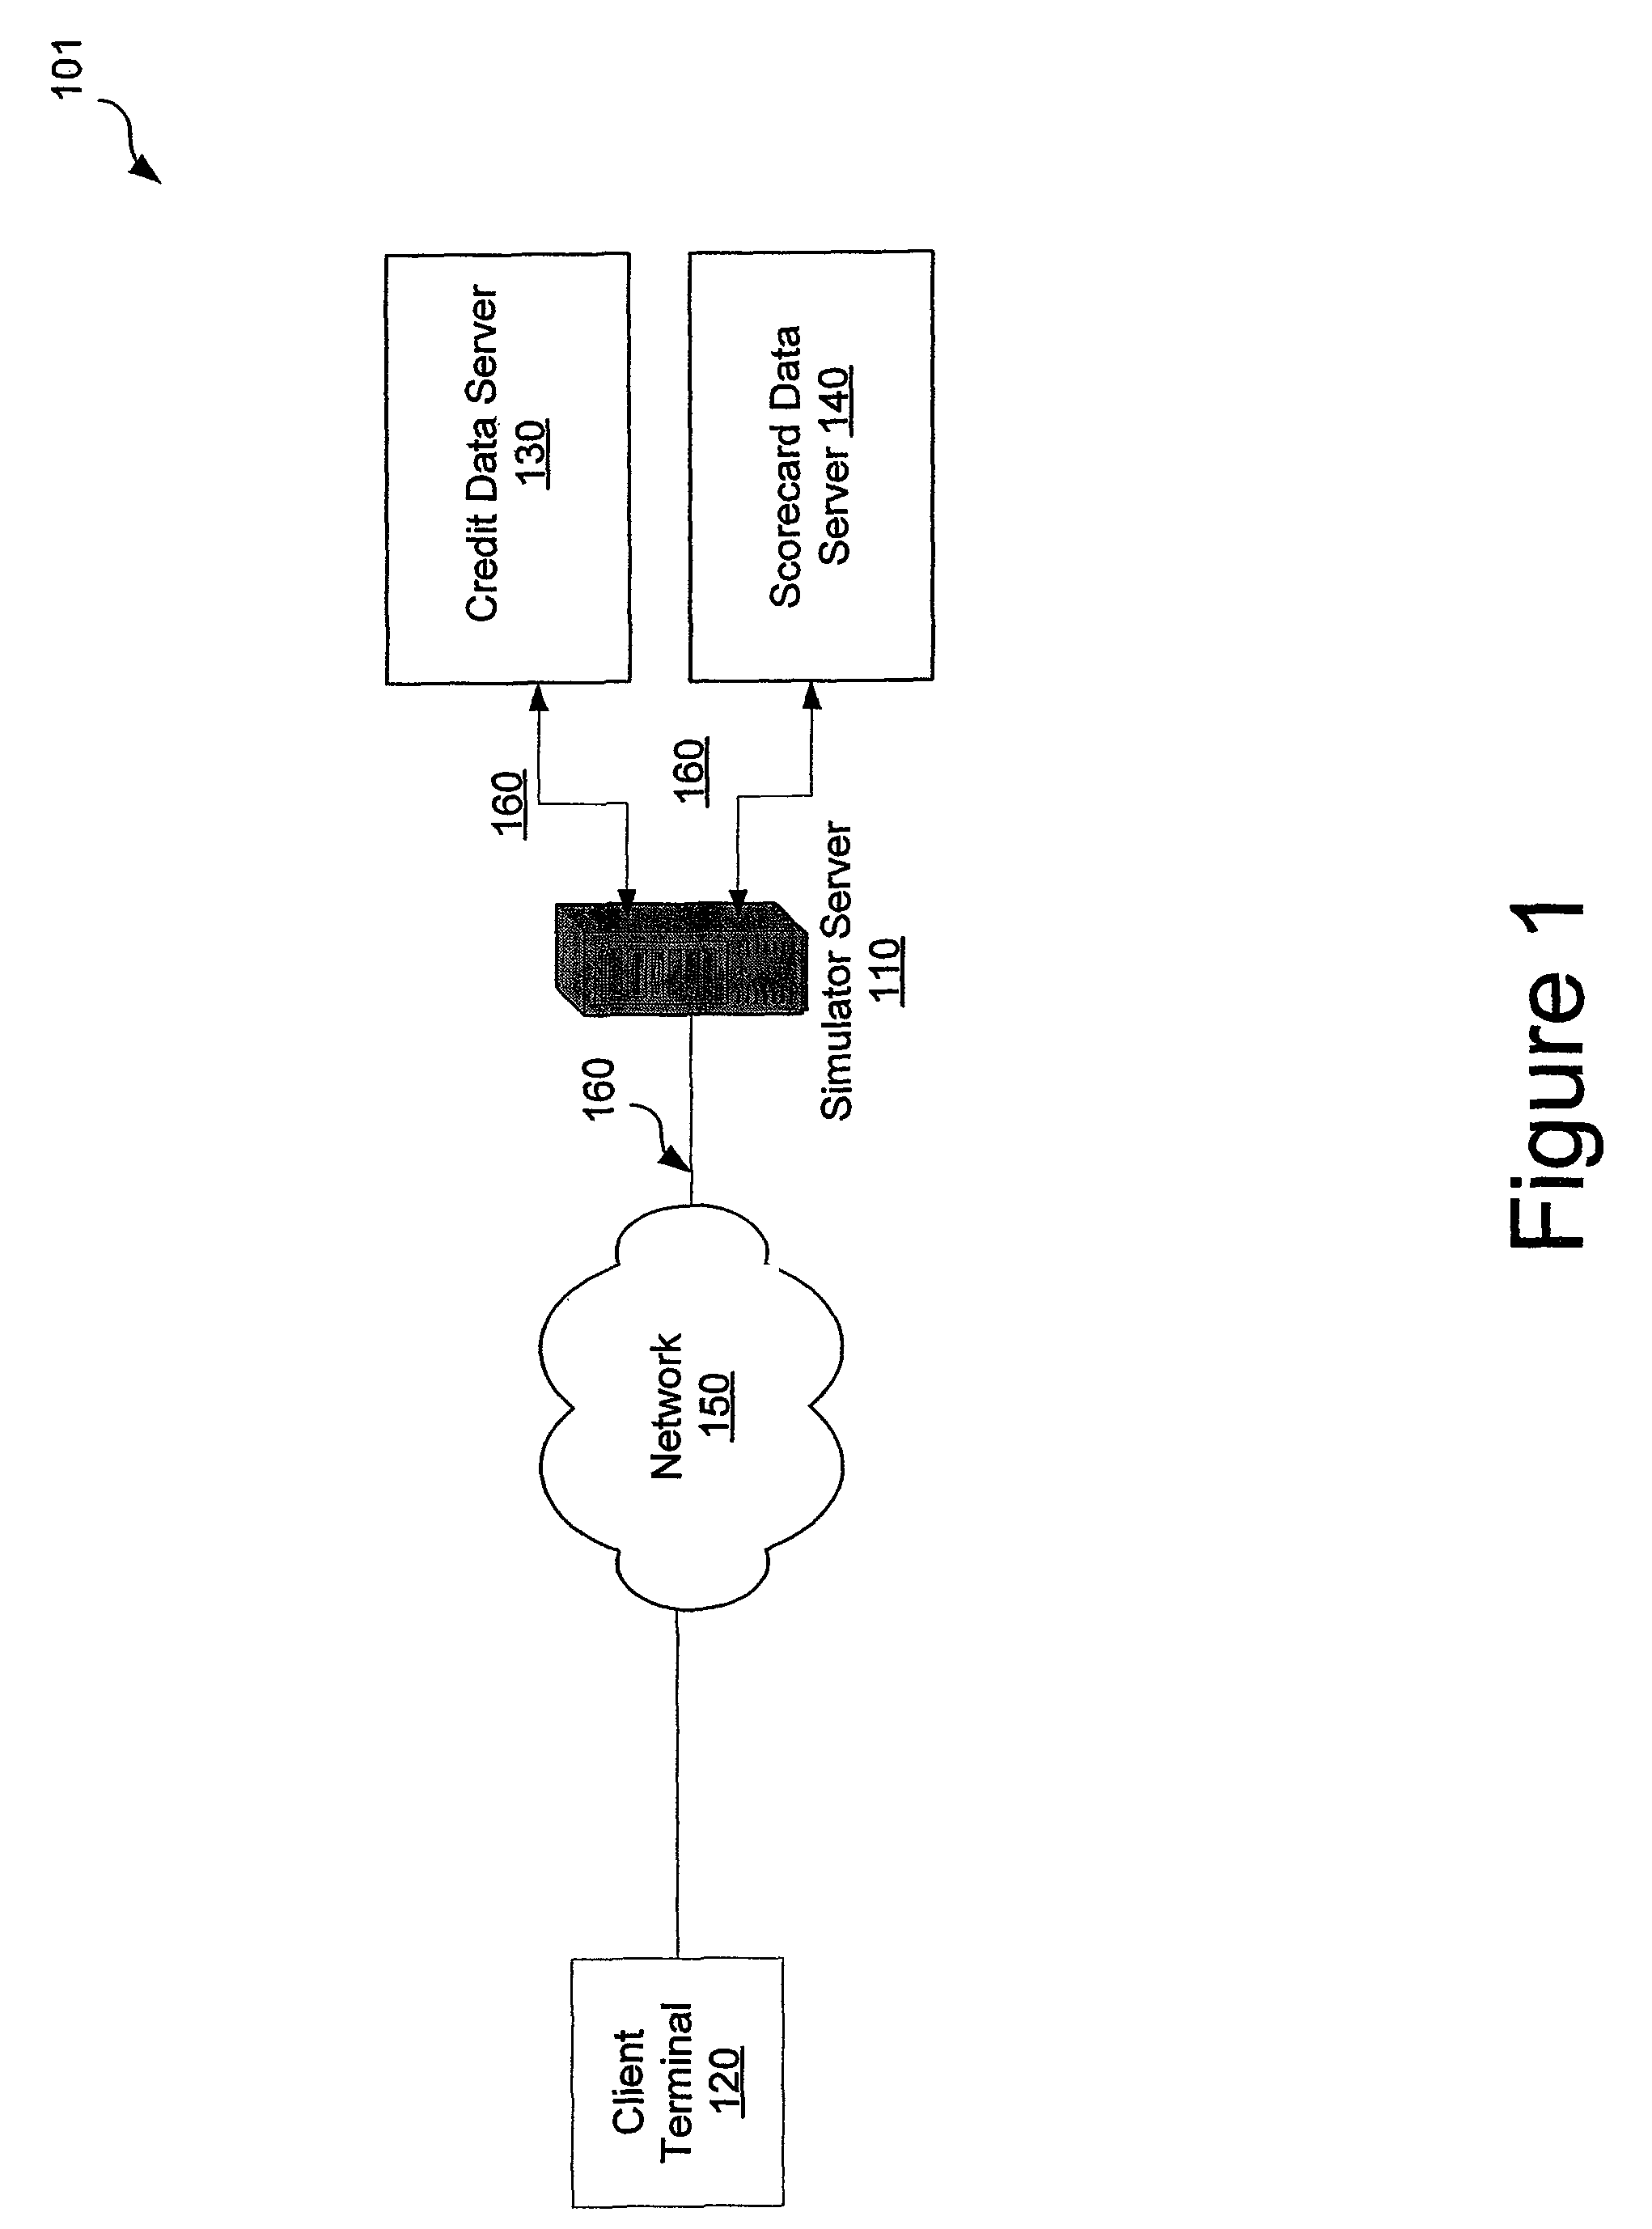 System and method for interactively simulating a credit-worthiness score